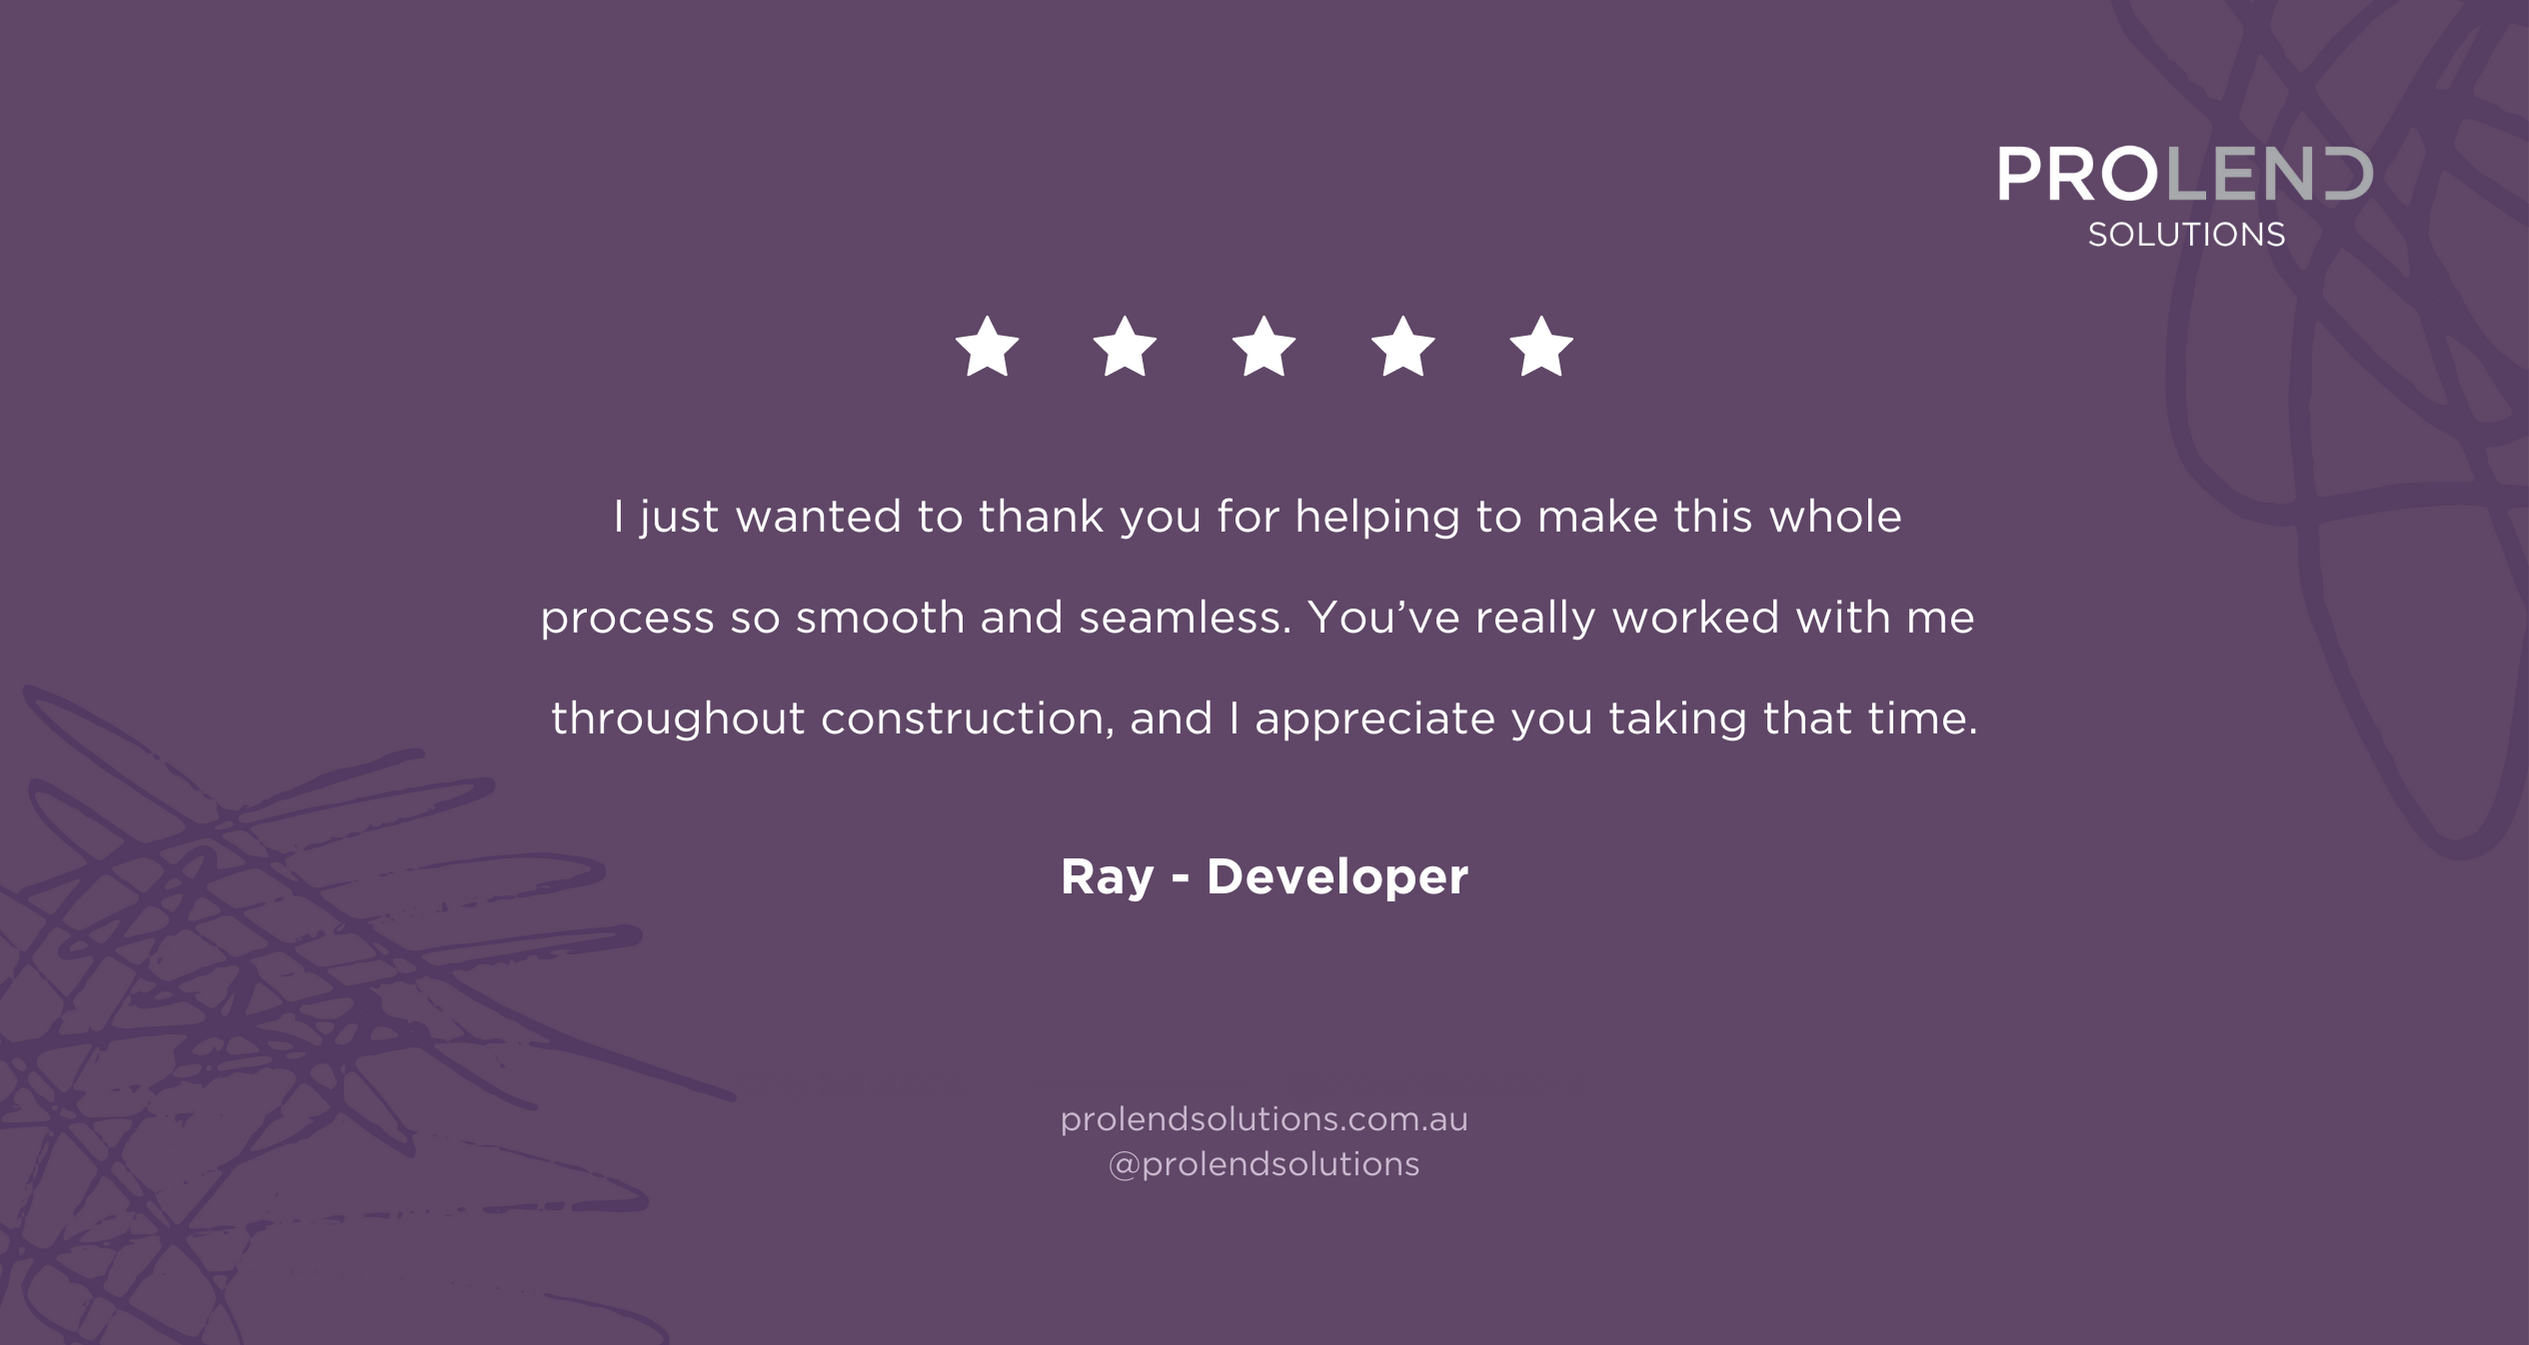 Ray Developer - Customer Testimonial - I just wanted to thank you for helping to make this whole process so smooth and seamless. You've really worked with me throughout constructions, and I appreciate you taking the time.